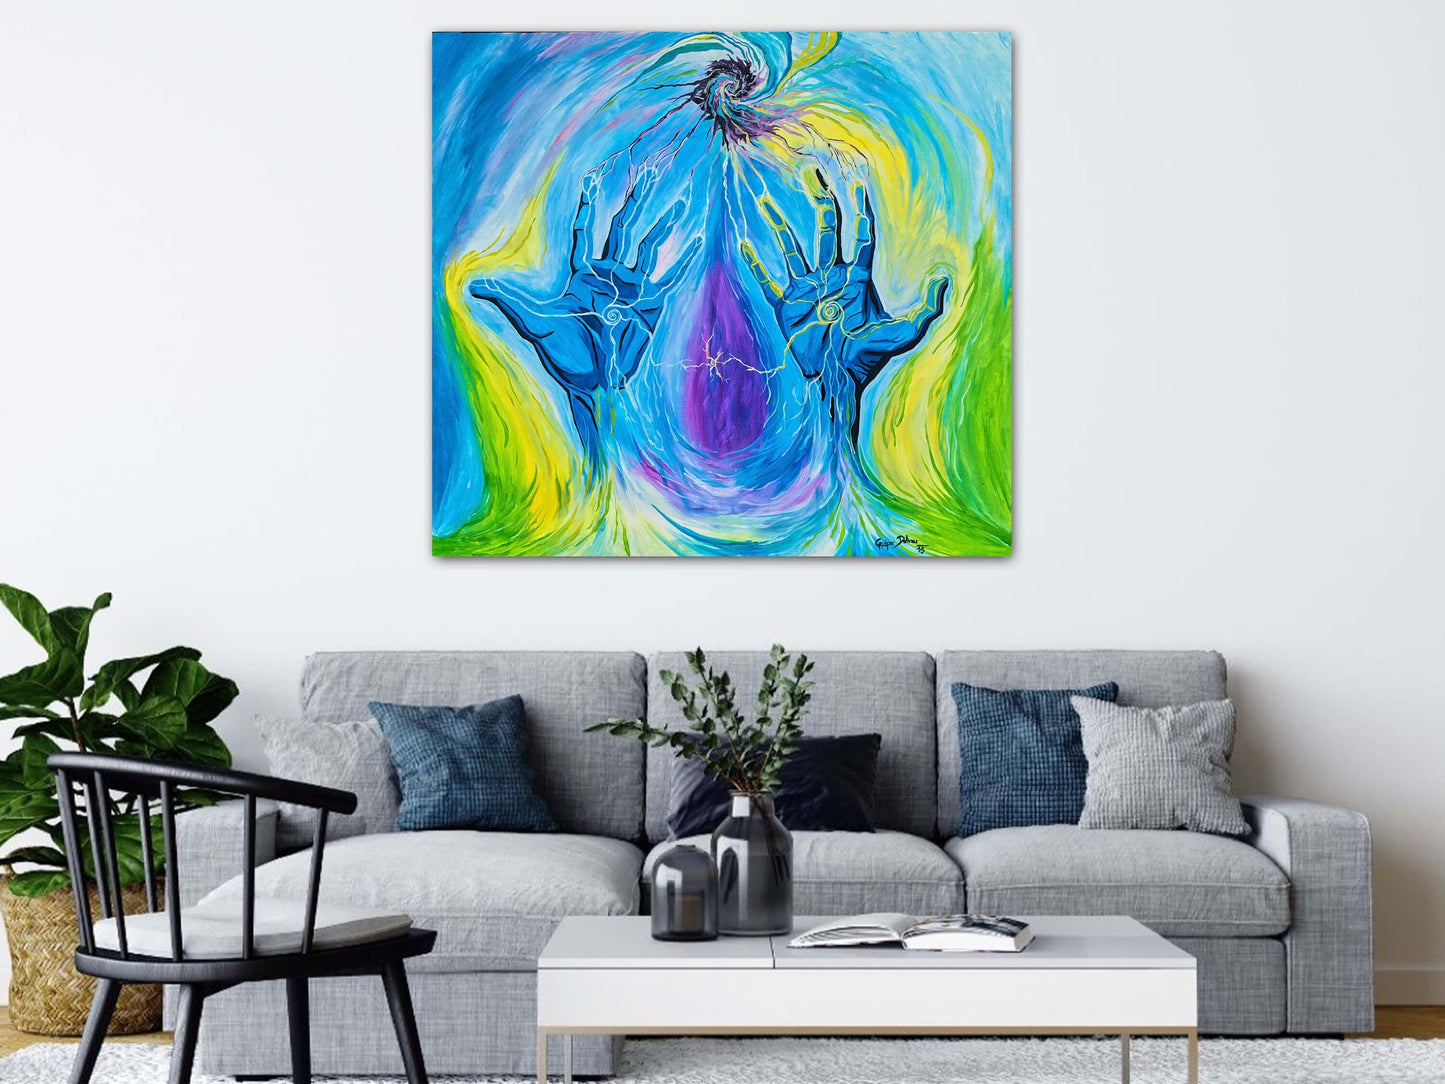 We Are Energy | Intuitive & Energetic Original Painting